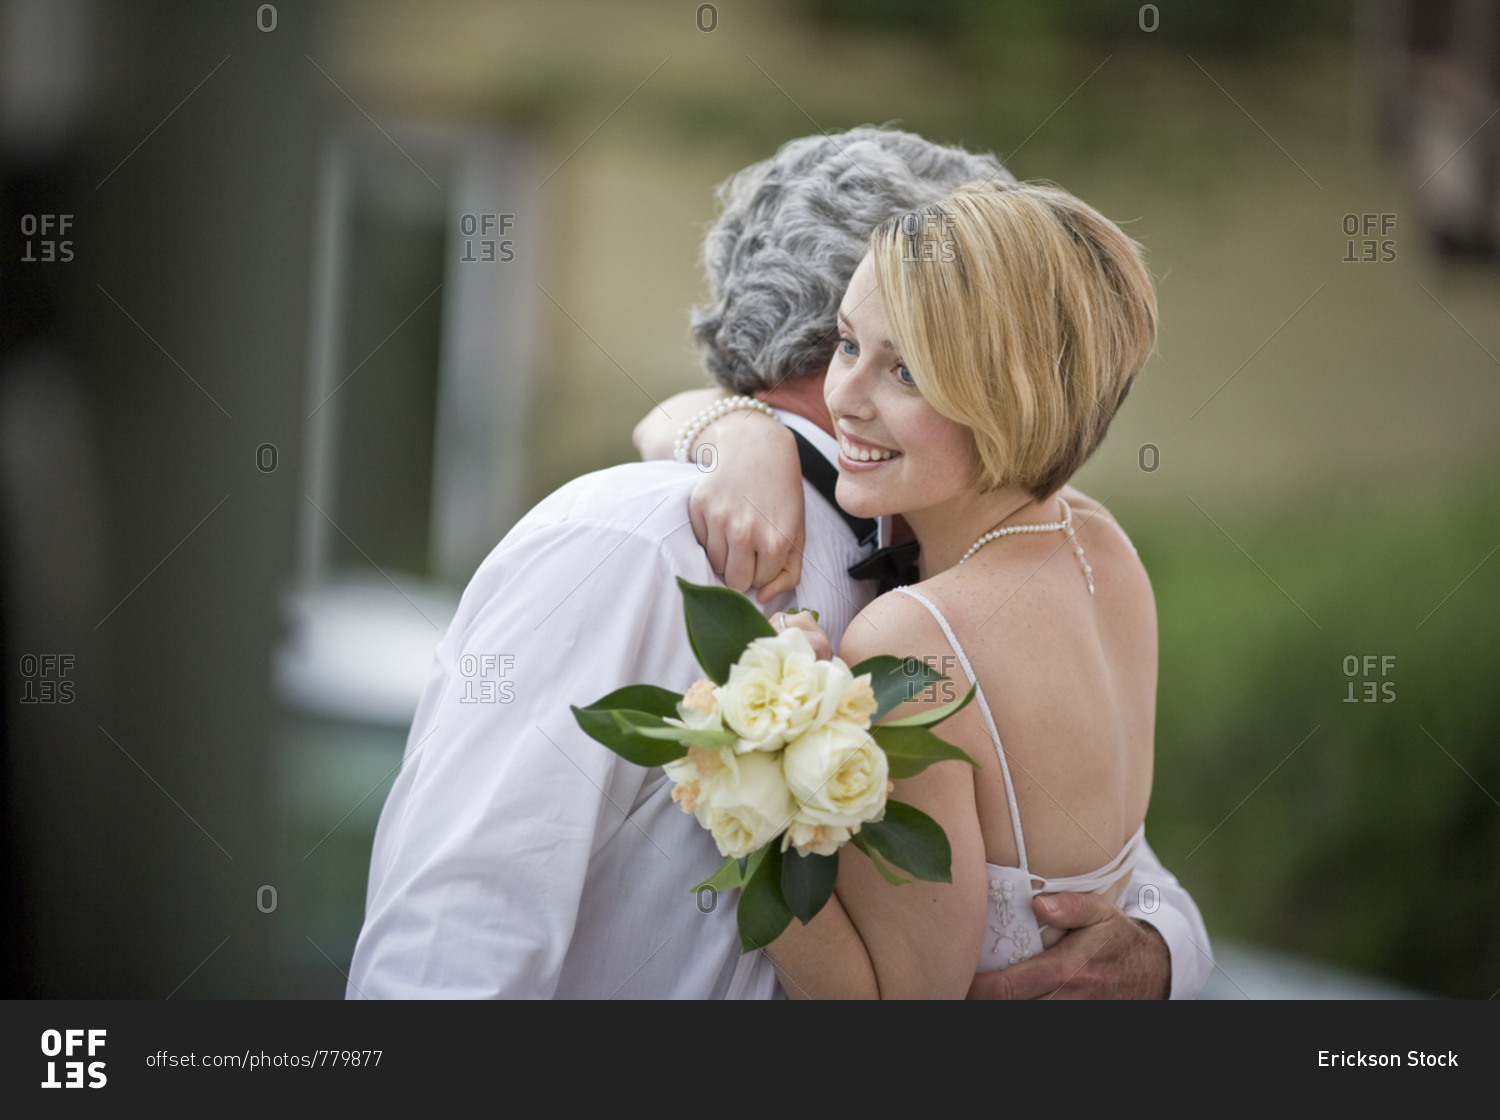 Smiling bride hugging the groom while holding a bouquet of roses.